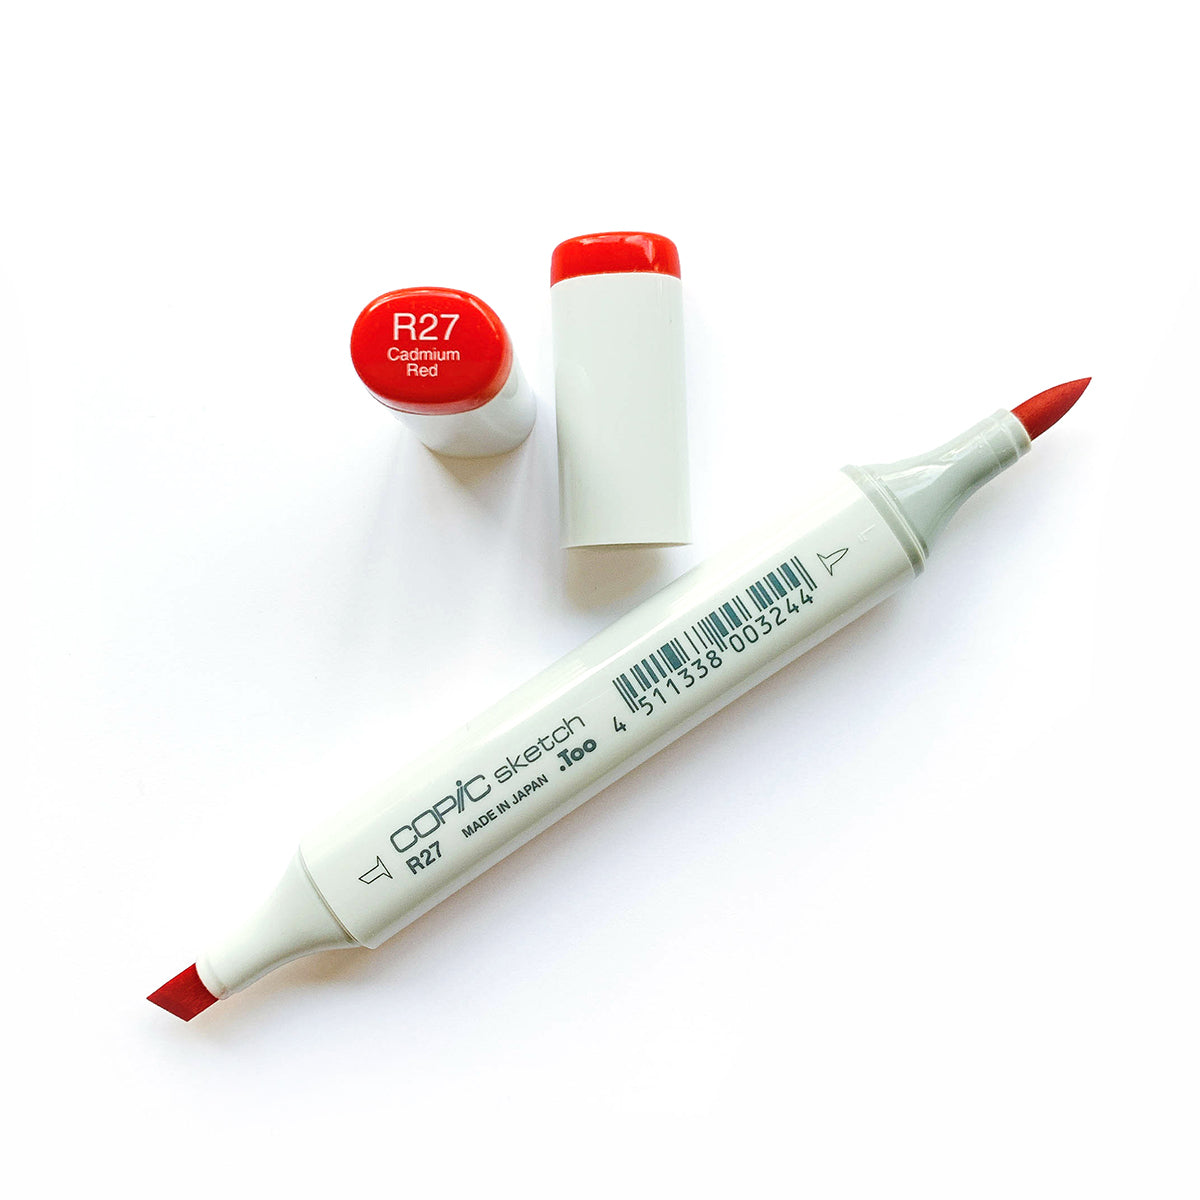 C.H. Hanson Red China Marker - 2 Count Carded